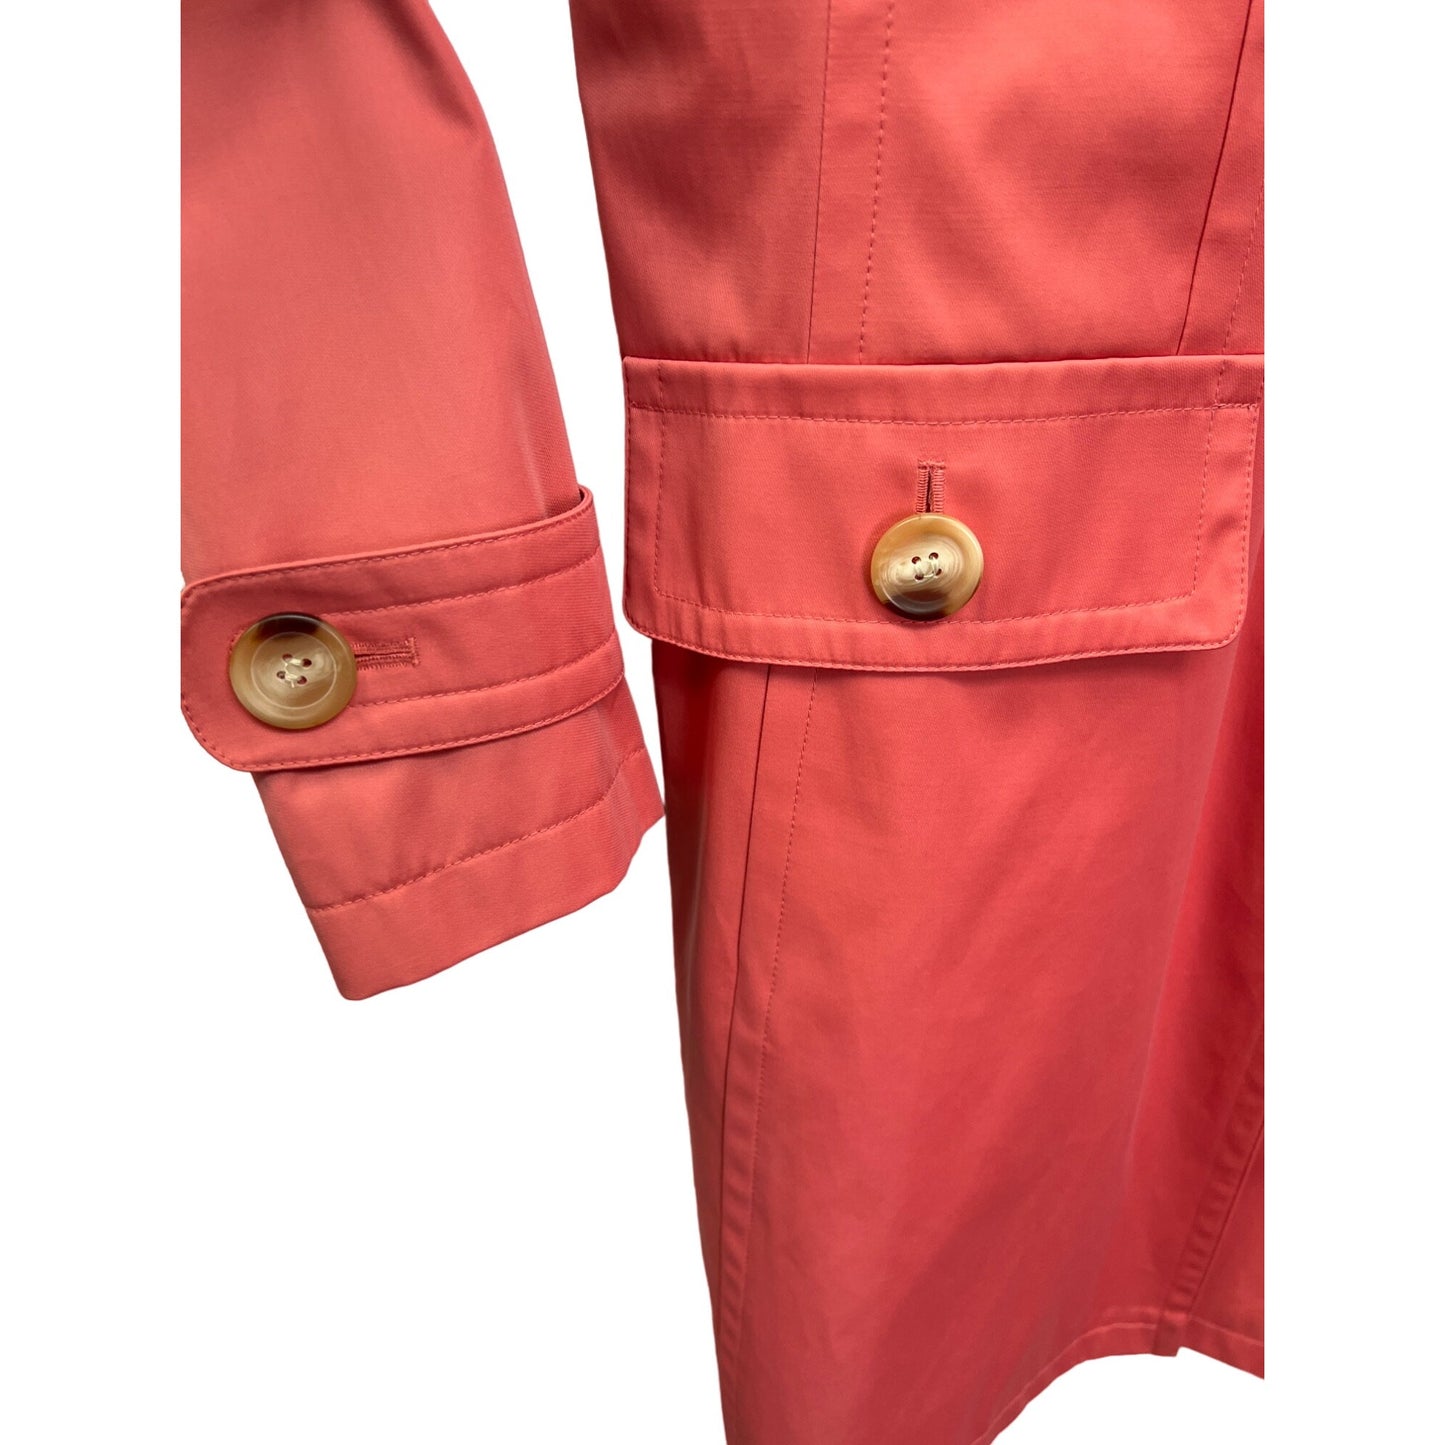 Gallery Long Pink Trench Coat